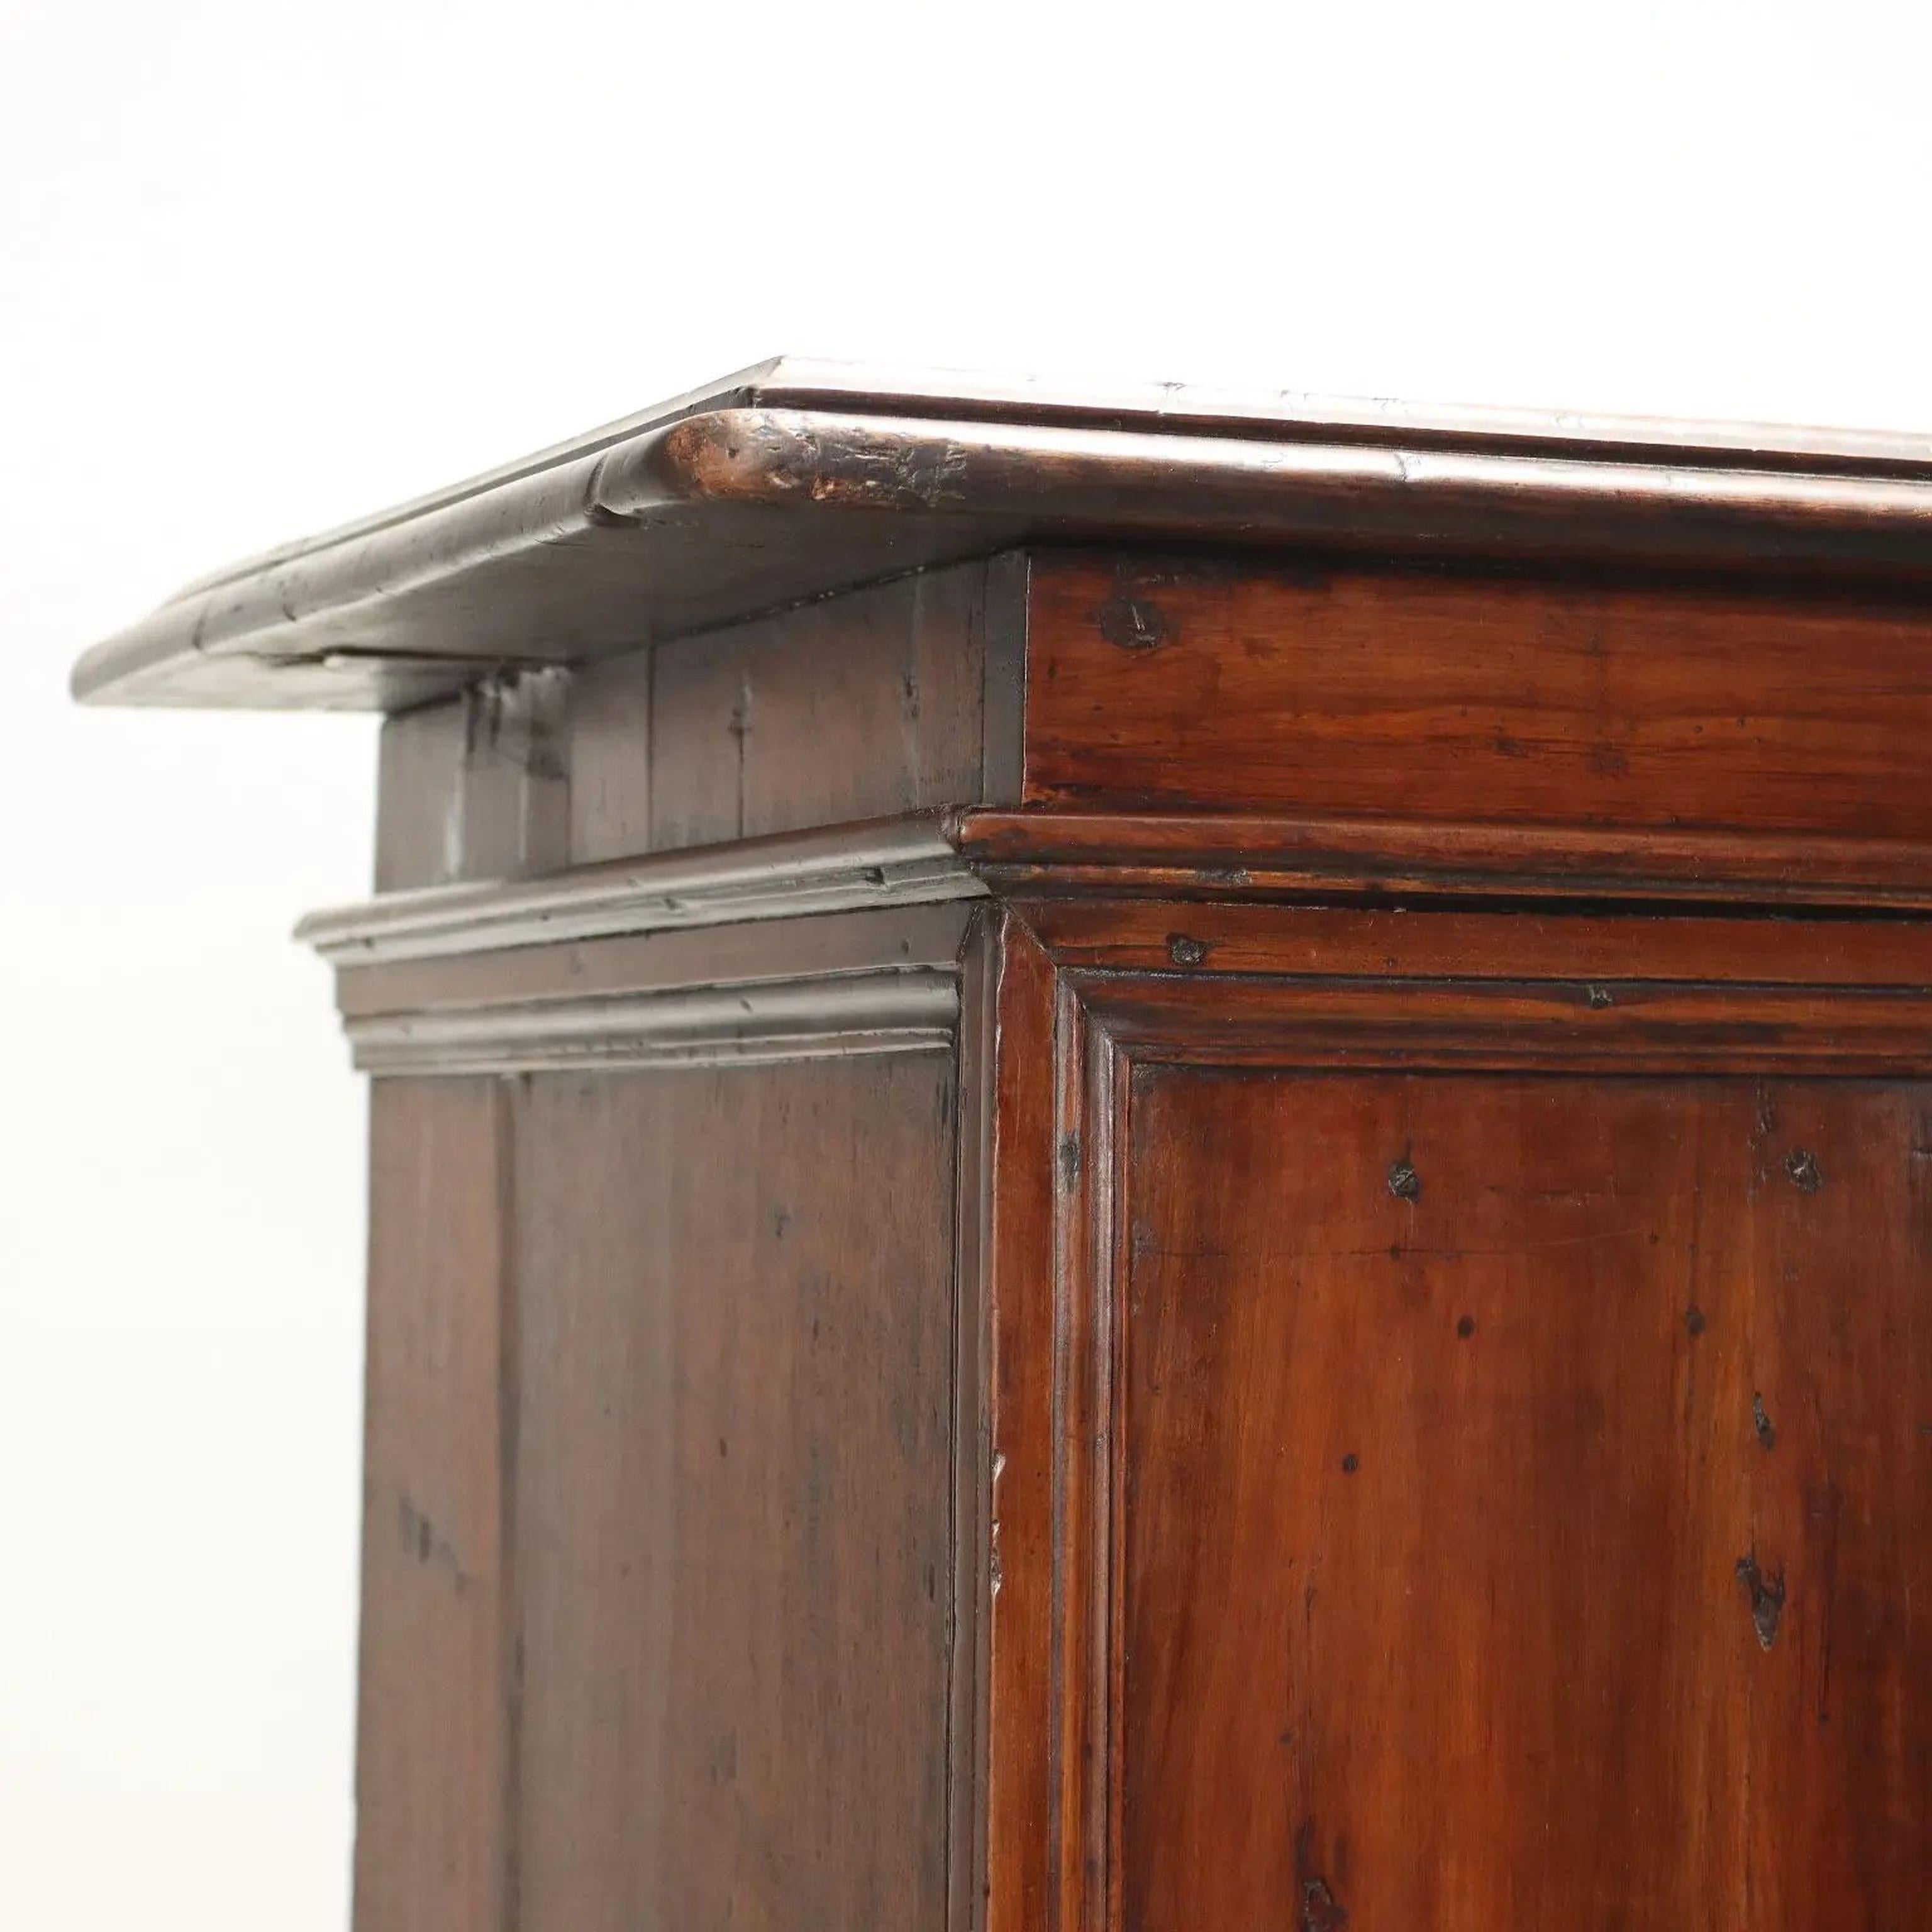 Rectangular top with molded edge over a pair of paneled doors raised on molded base with bracket feet 